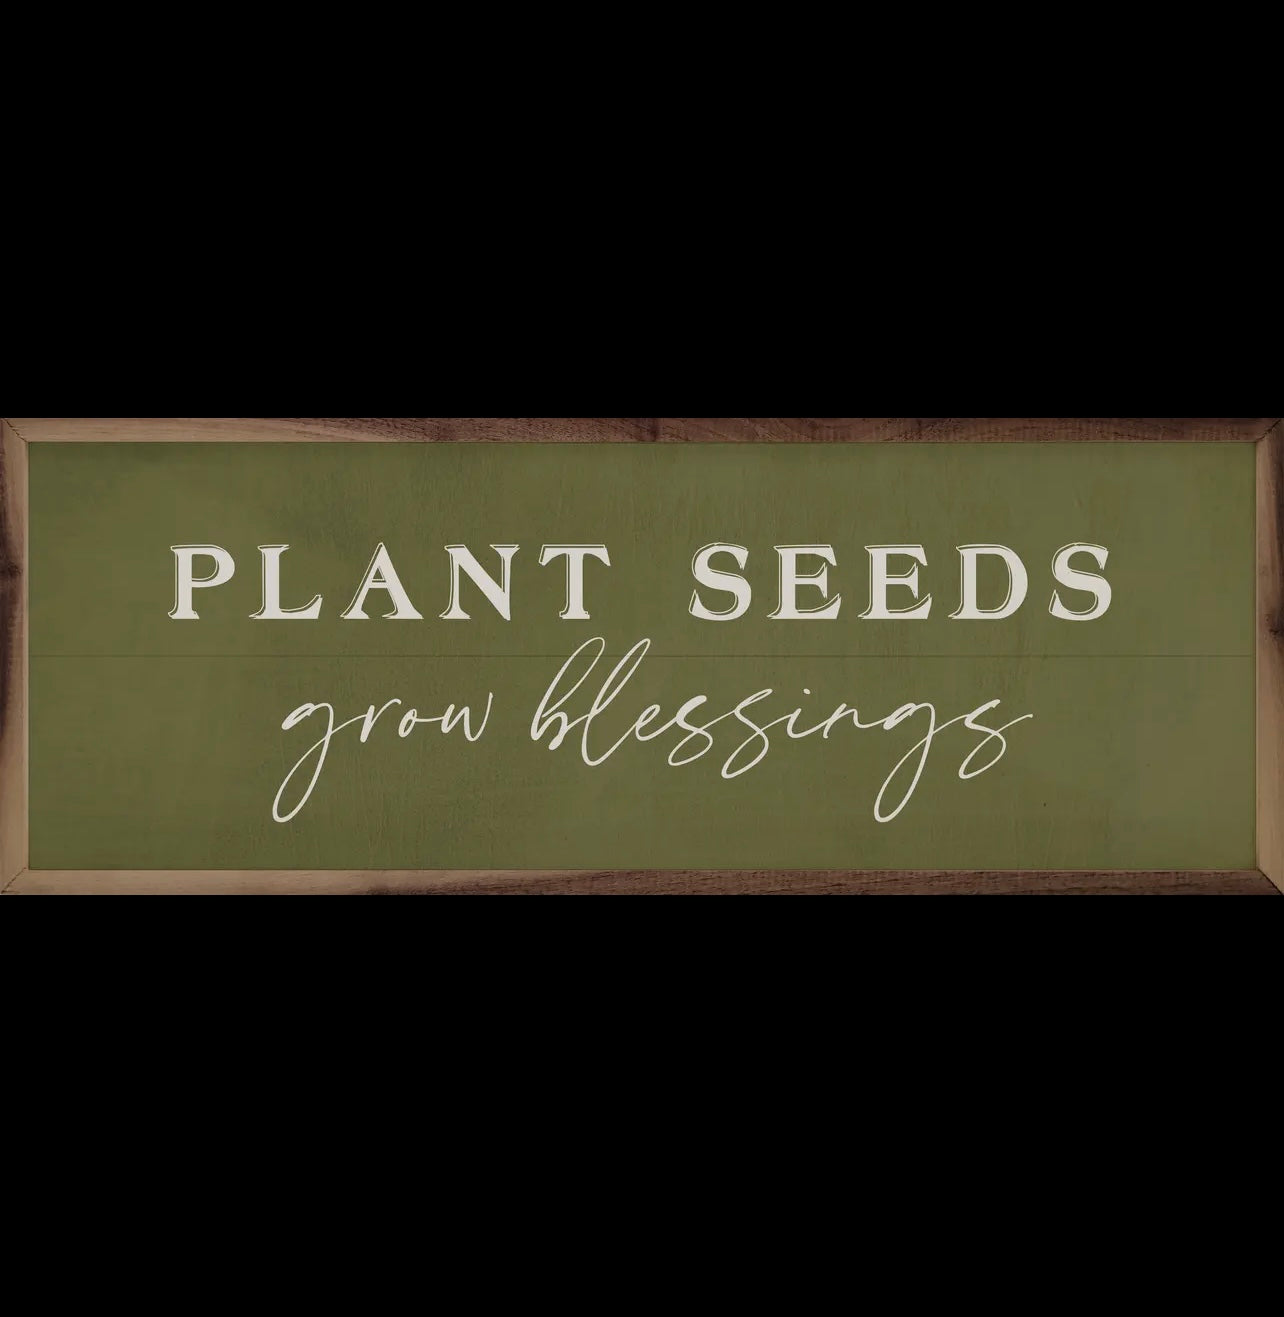 Plant Seeds Grow Blessings